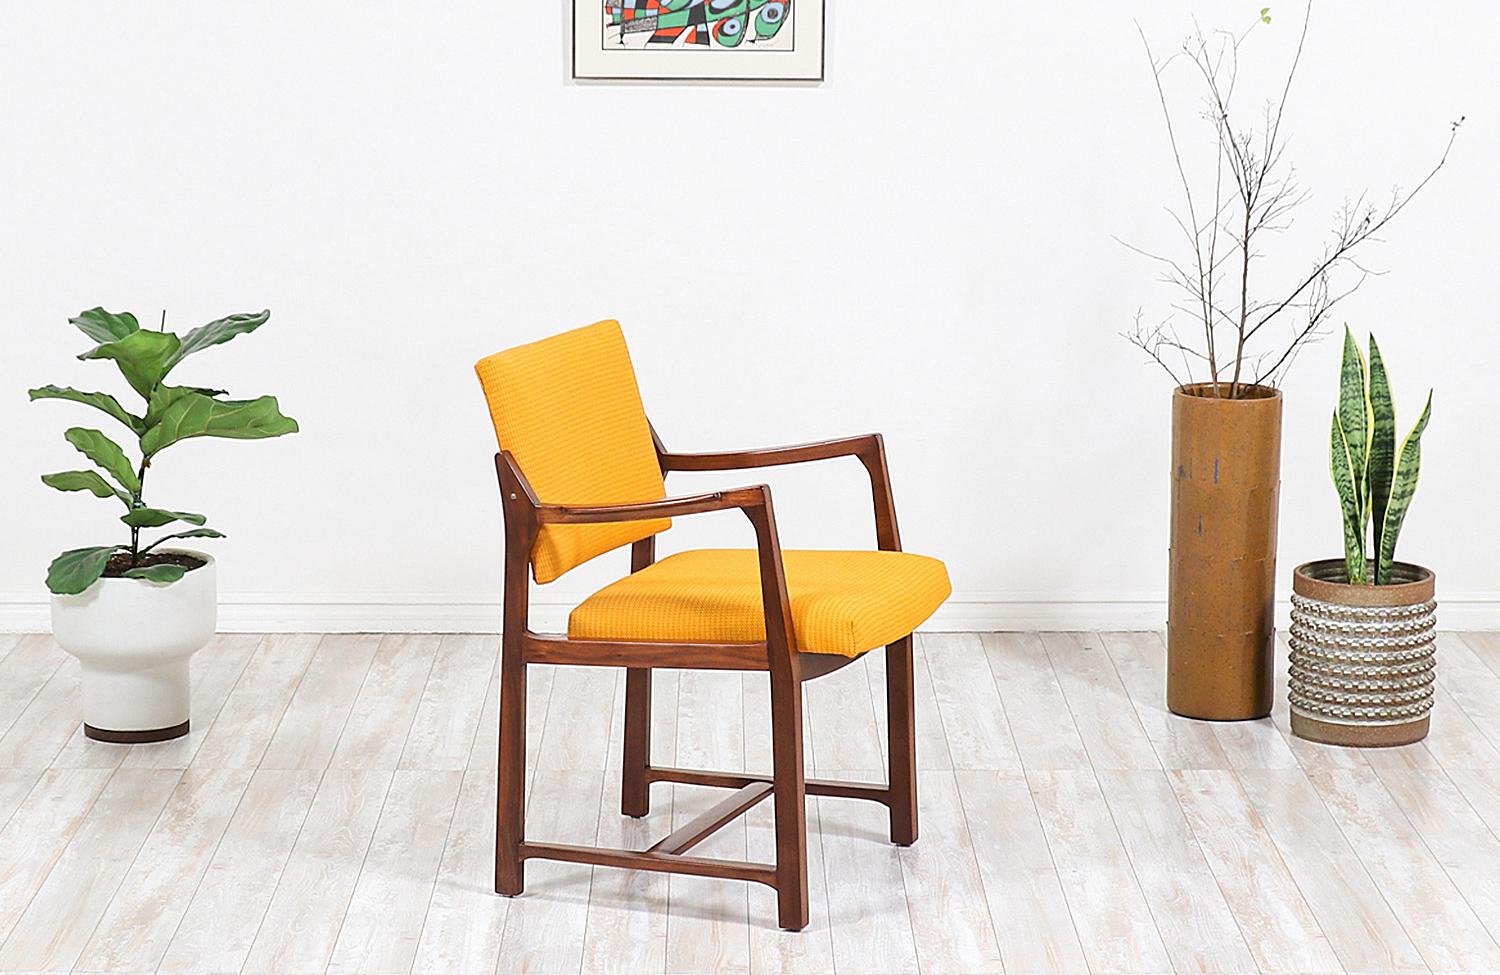 Beautiful Mid-Century Modern armchair designed by American furniture designer, Edward J. Wormley, for Dunbar in the United States, circa 1950s. This sleek design features a solid walnut wood frame with soft curvilinear arms and a geometric base